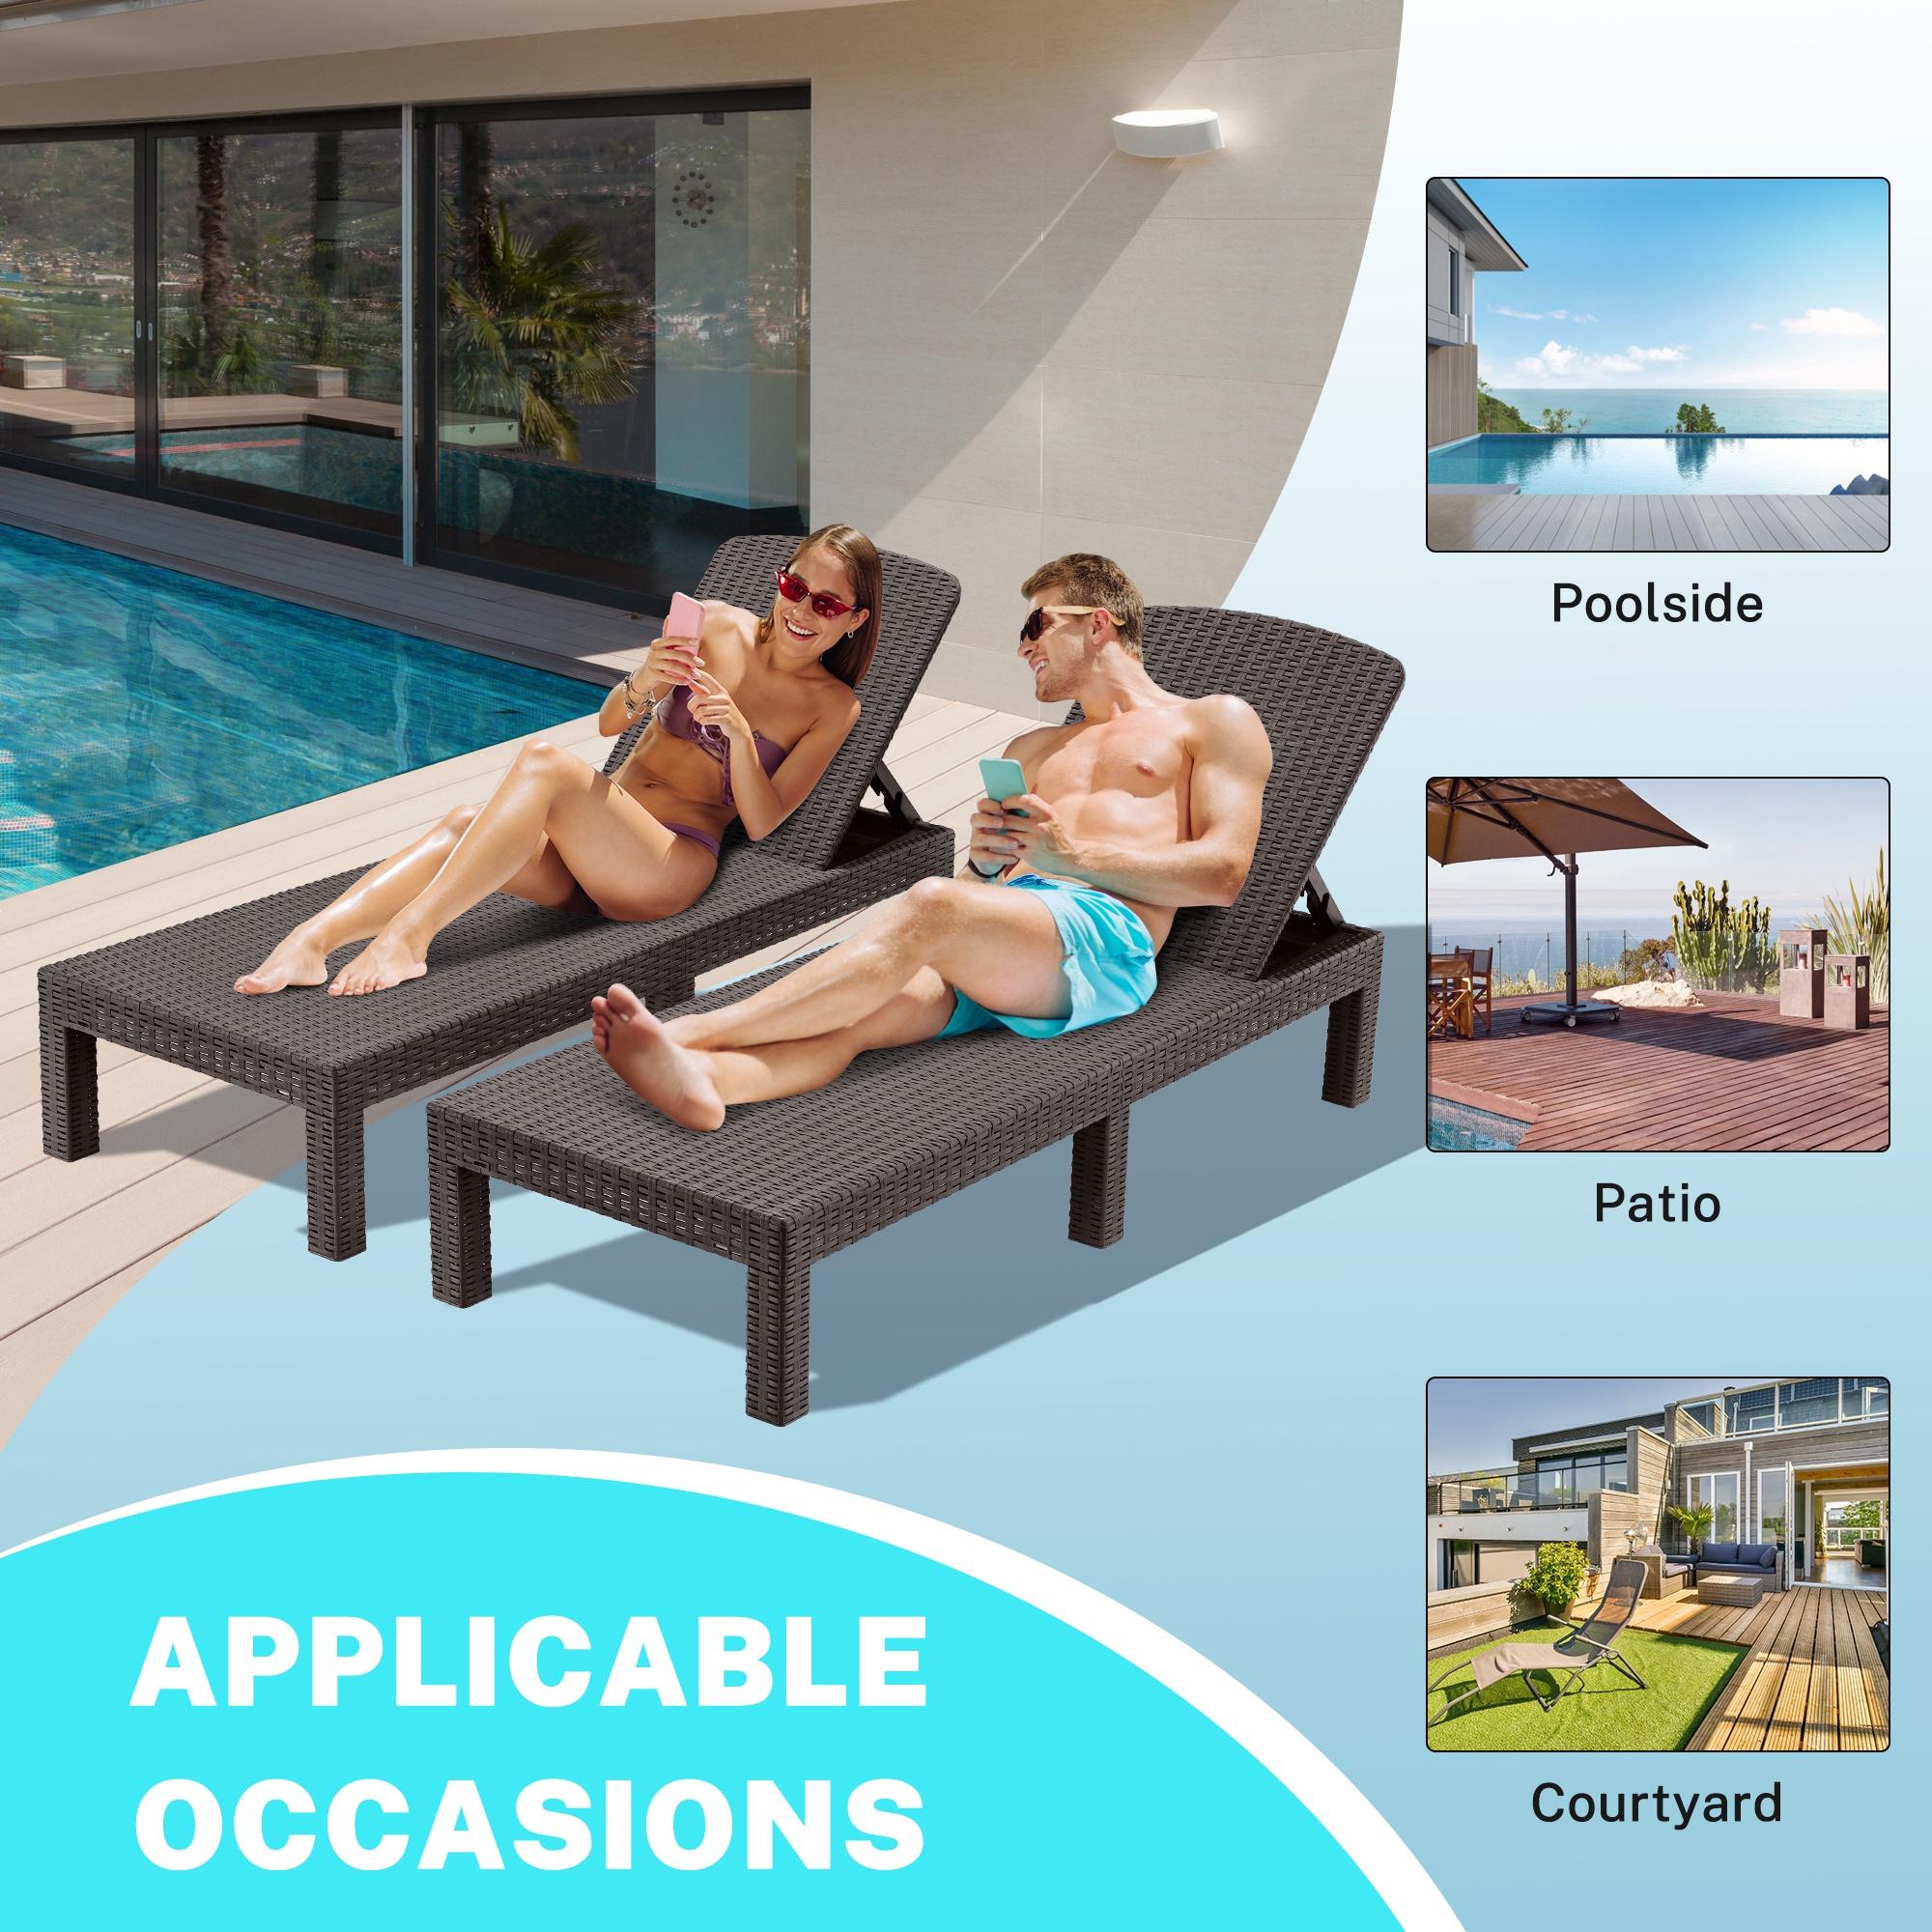 Syngar 2 Piece Chaise Lounge Set for Outside, Outdoor Adjustable Lounge Chairs Set of 2, Patio All-Weather PP Resin Reclining Chaise for Poolside Backyard Garden Porch, Espresso - image 4 of 10